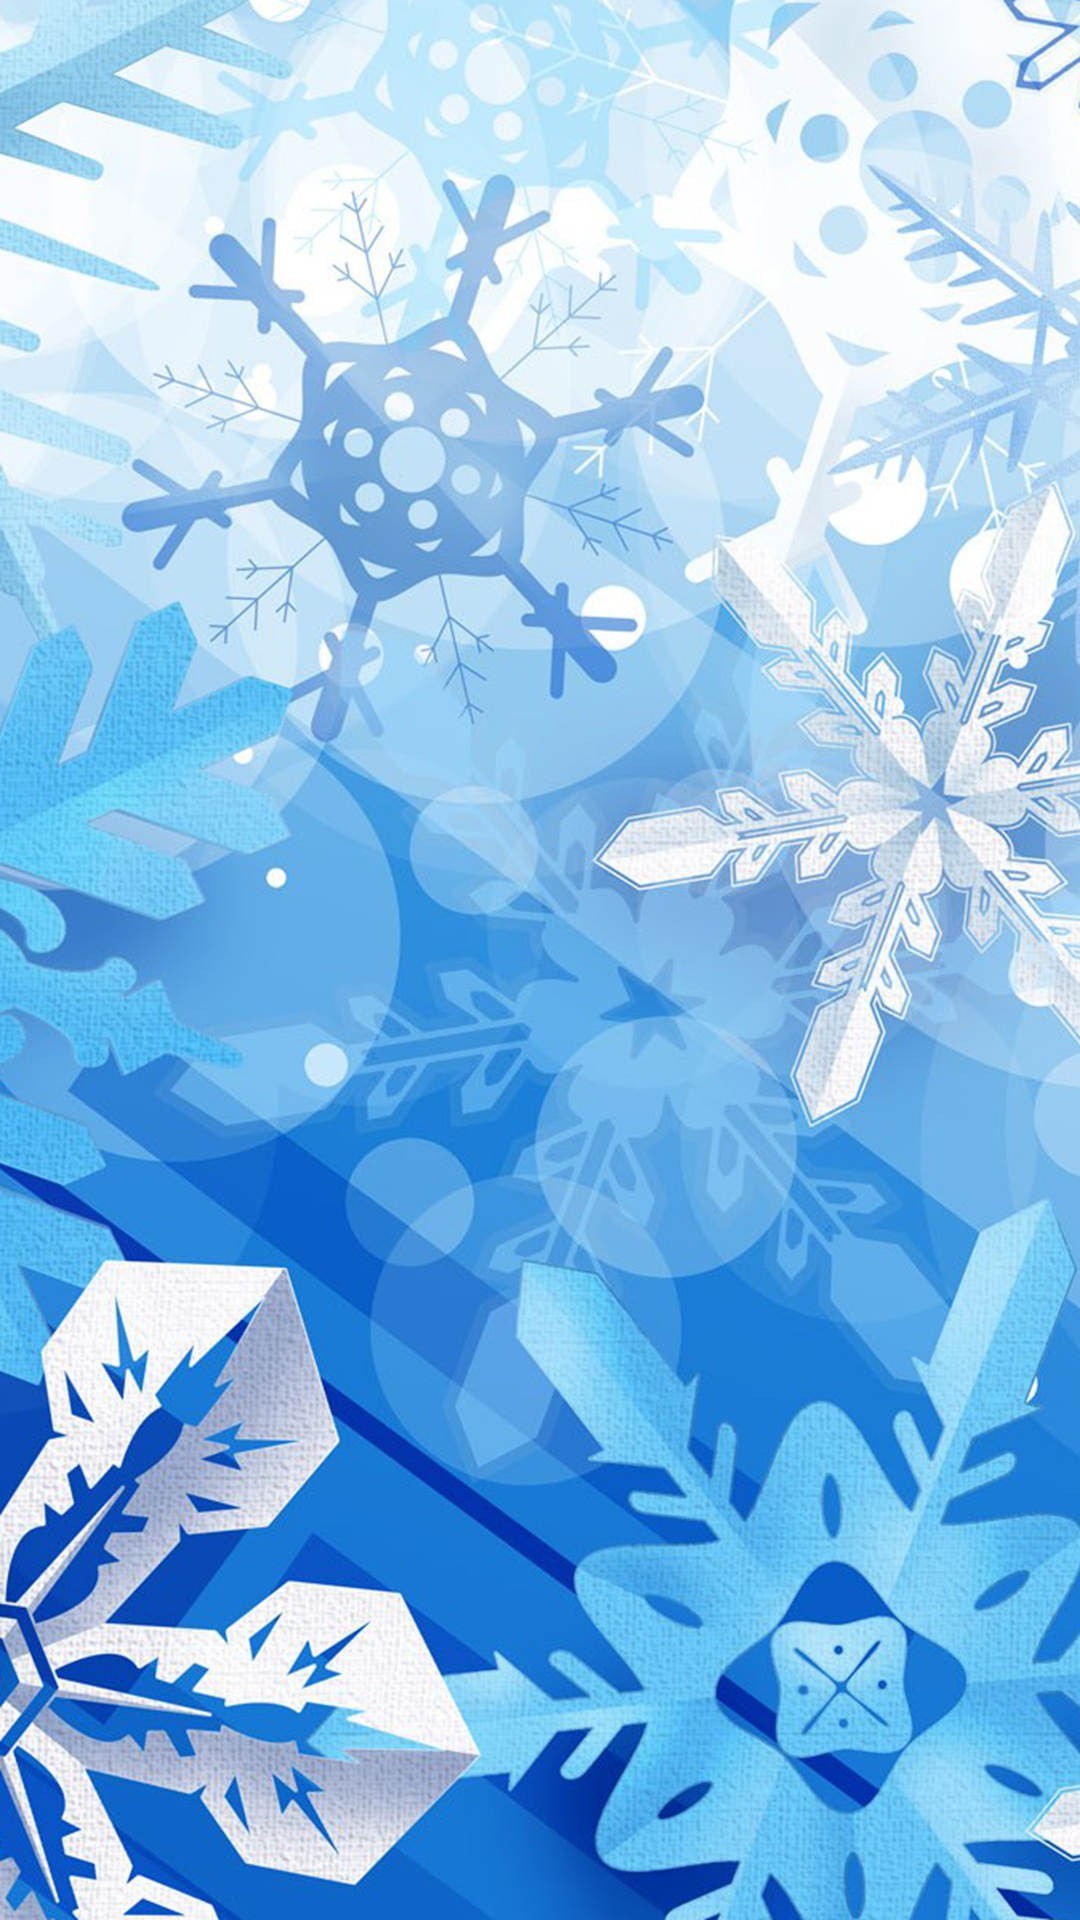 Snowflakes HD iPhone 6 plus wallpaper for 2014 Christmas